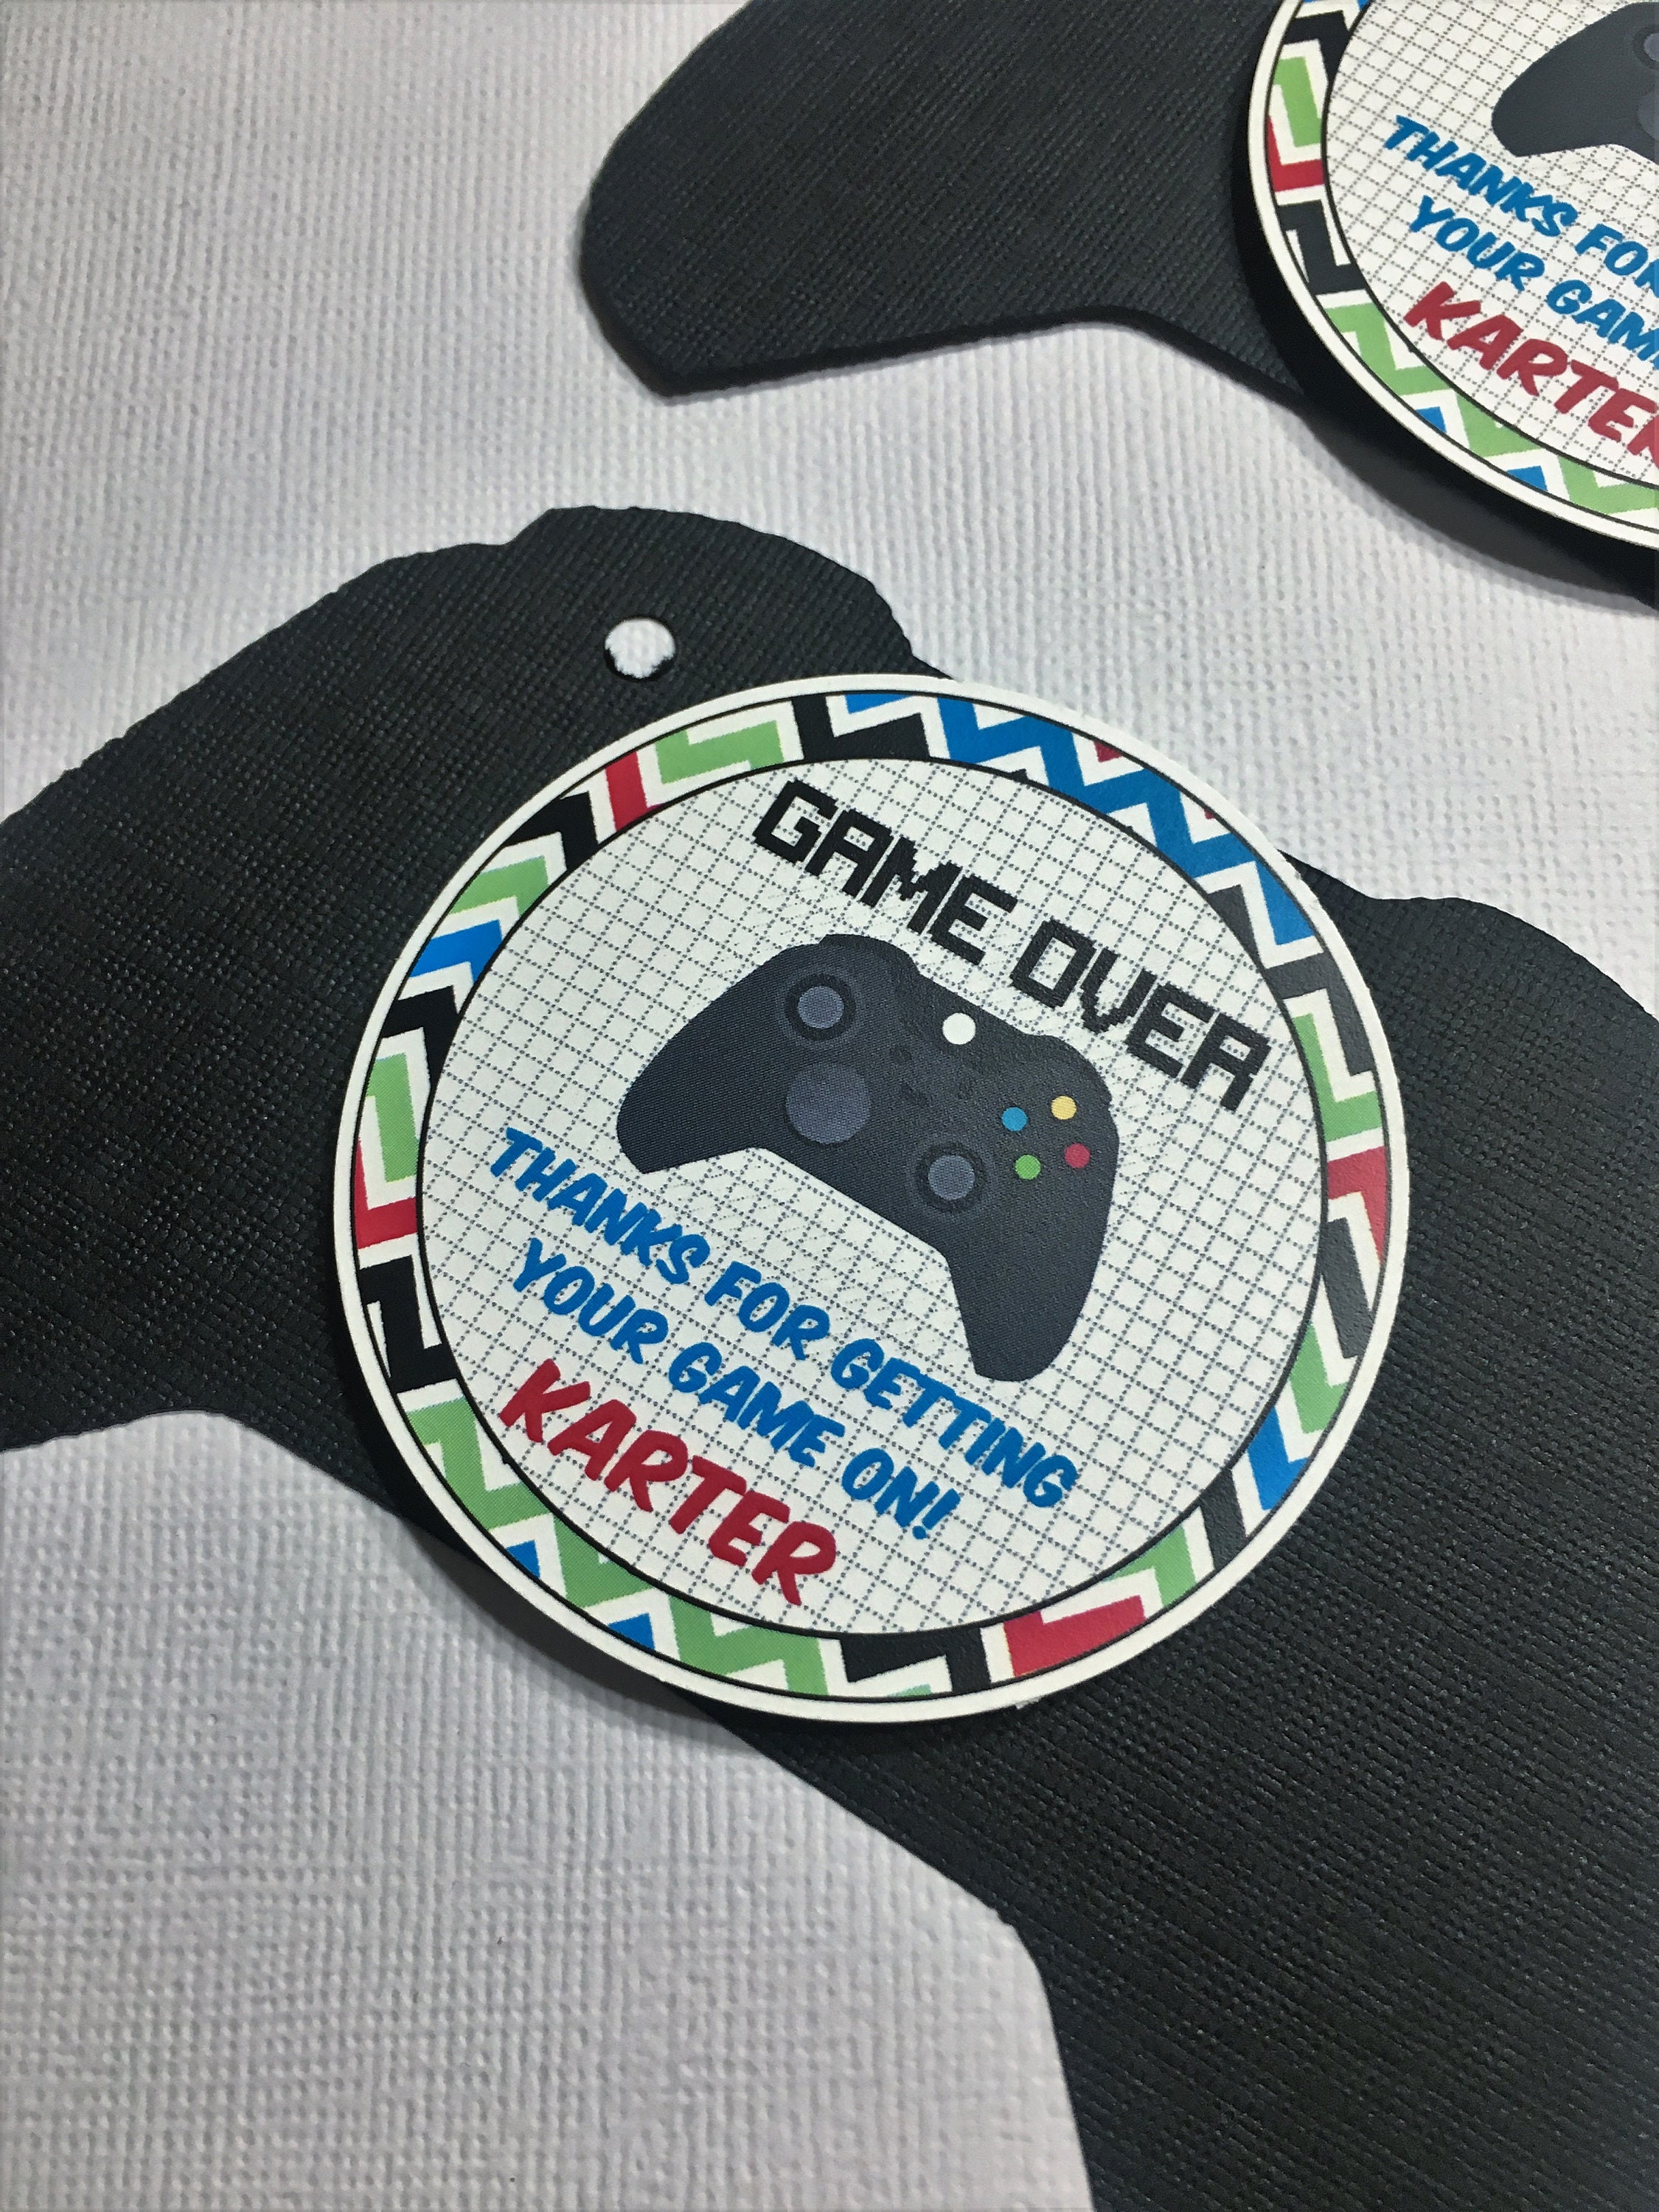 Gamer Hat Video Game Controller Gamer Birthday Party Favor 